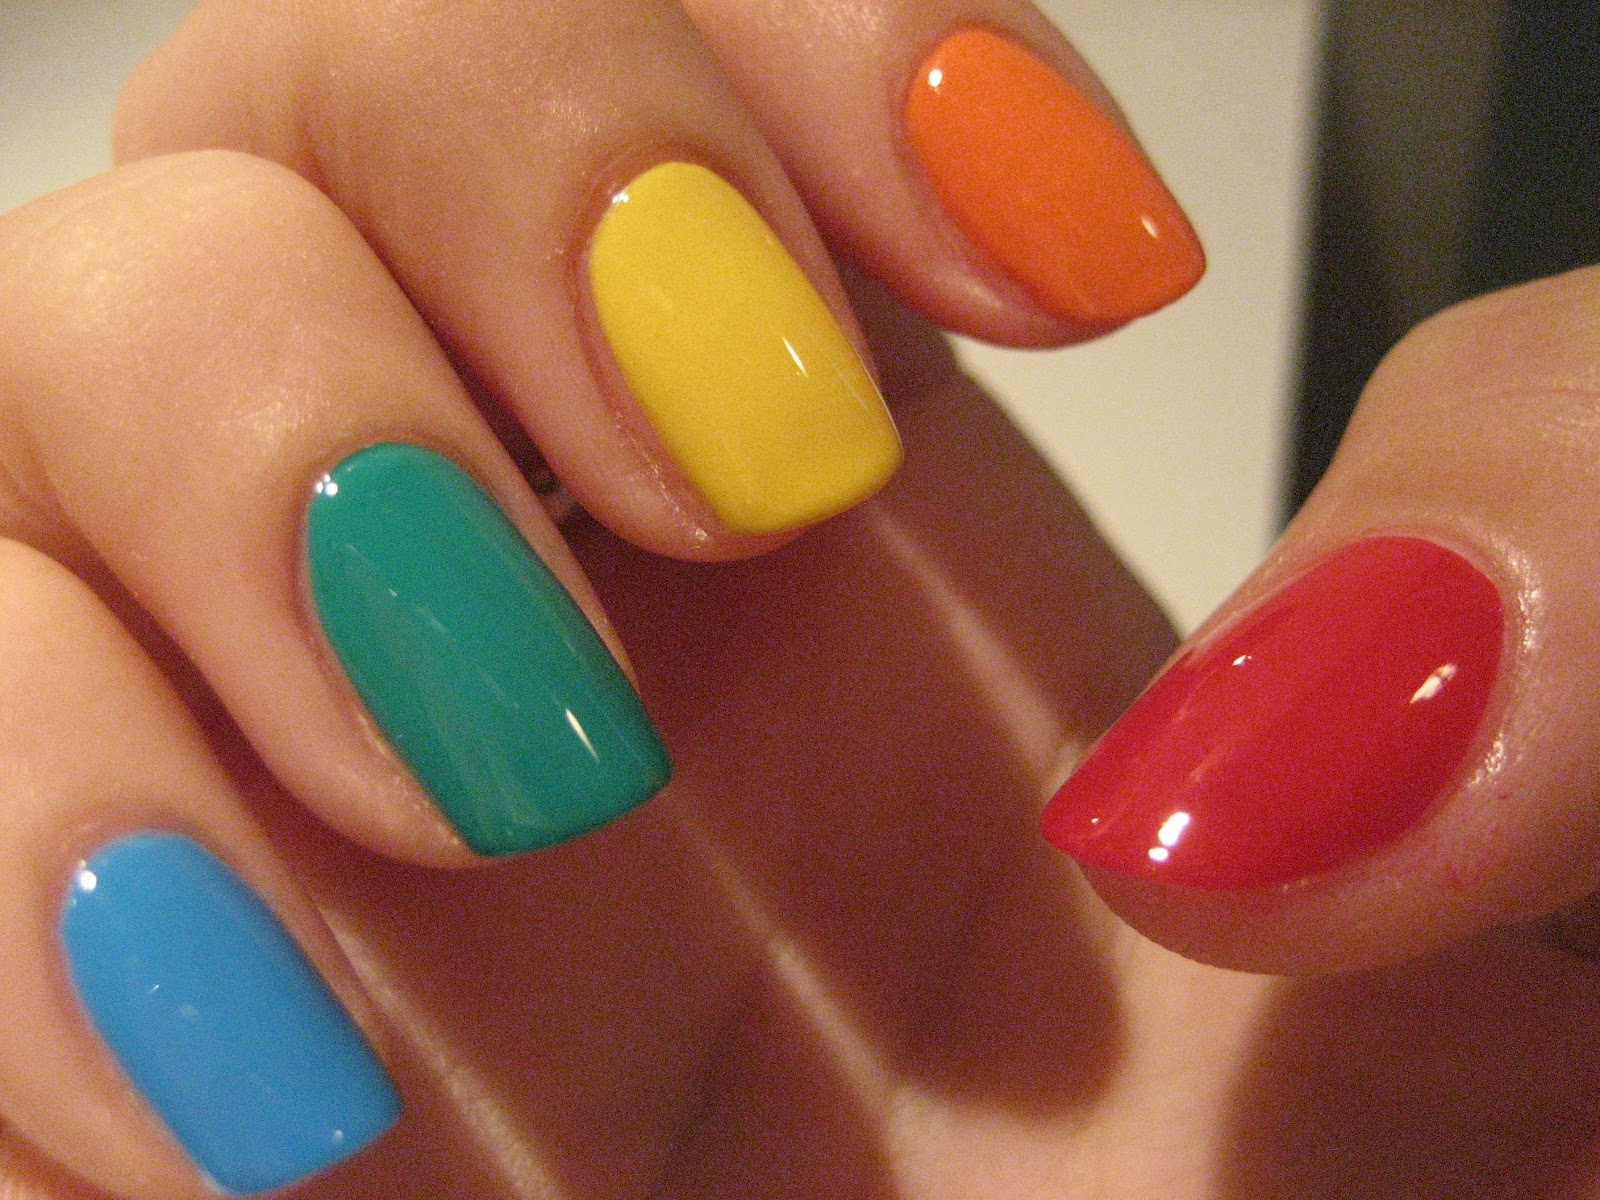 10. 12 Gorgeous Skittle Nail Art Designs for a Colorful Manicure - wide 2